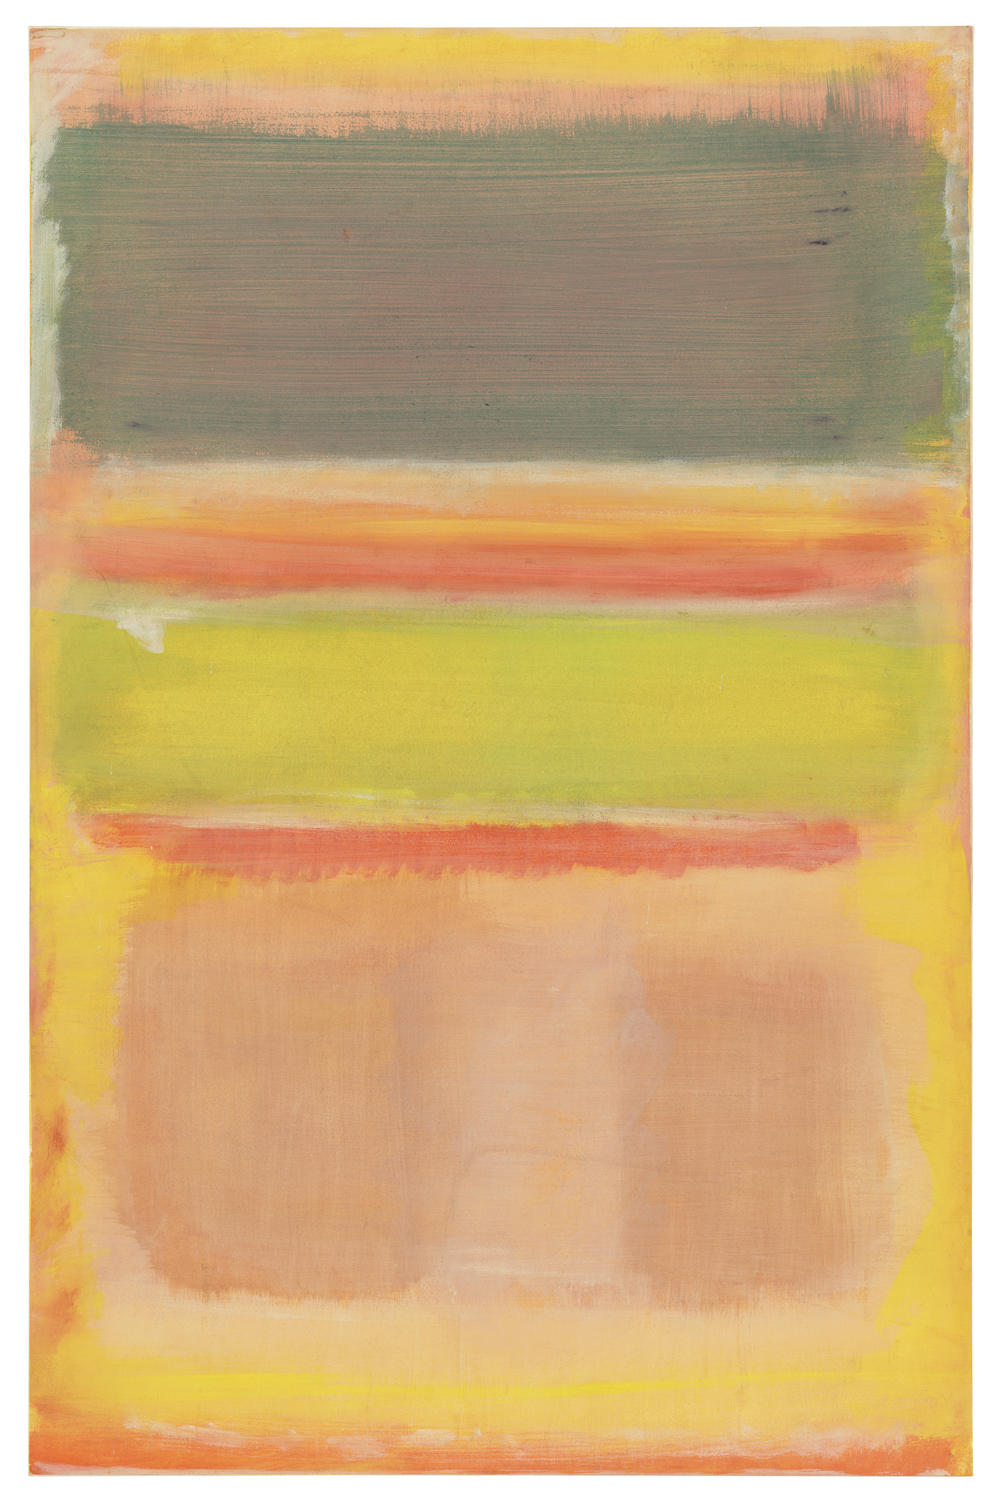 Mark Rothko, <em>Untitled</em>, c. 1949, oil and watercolor on watercolor paper.